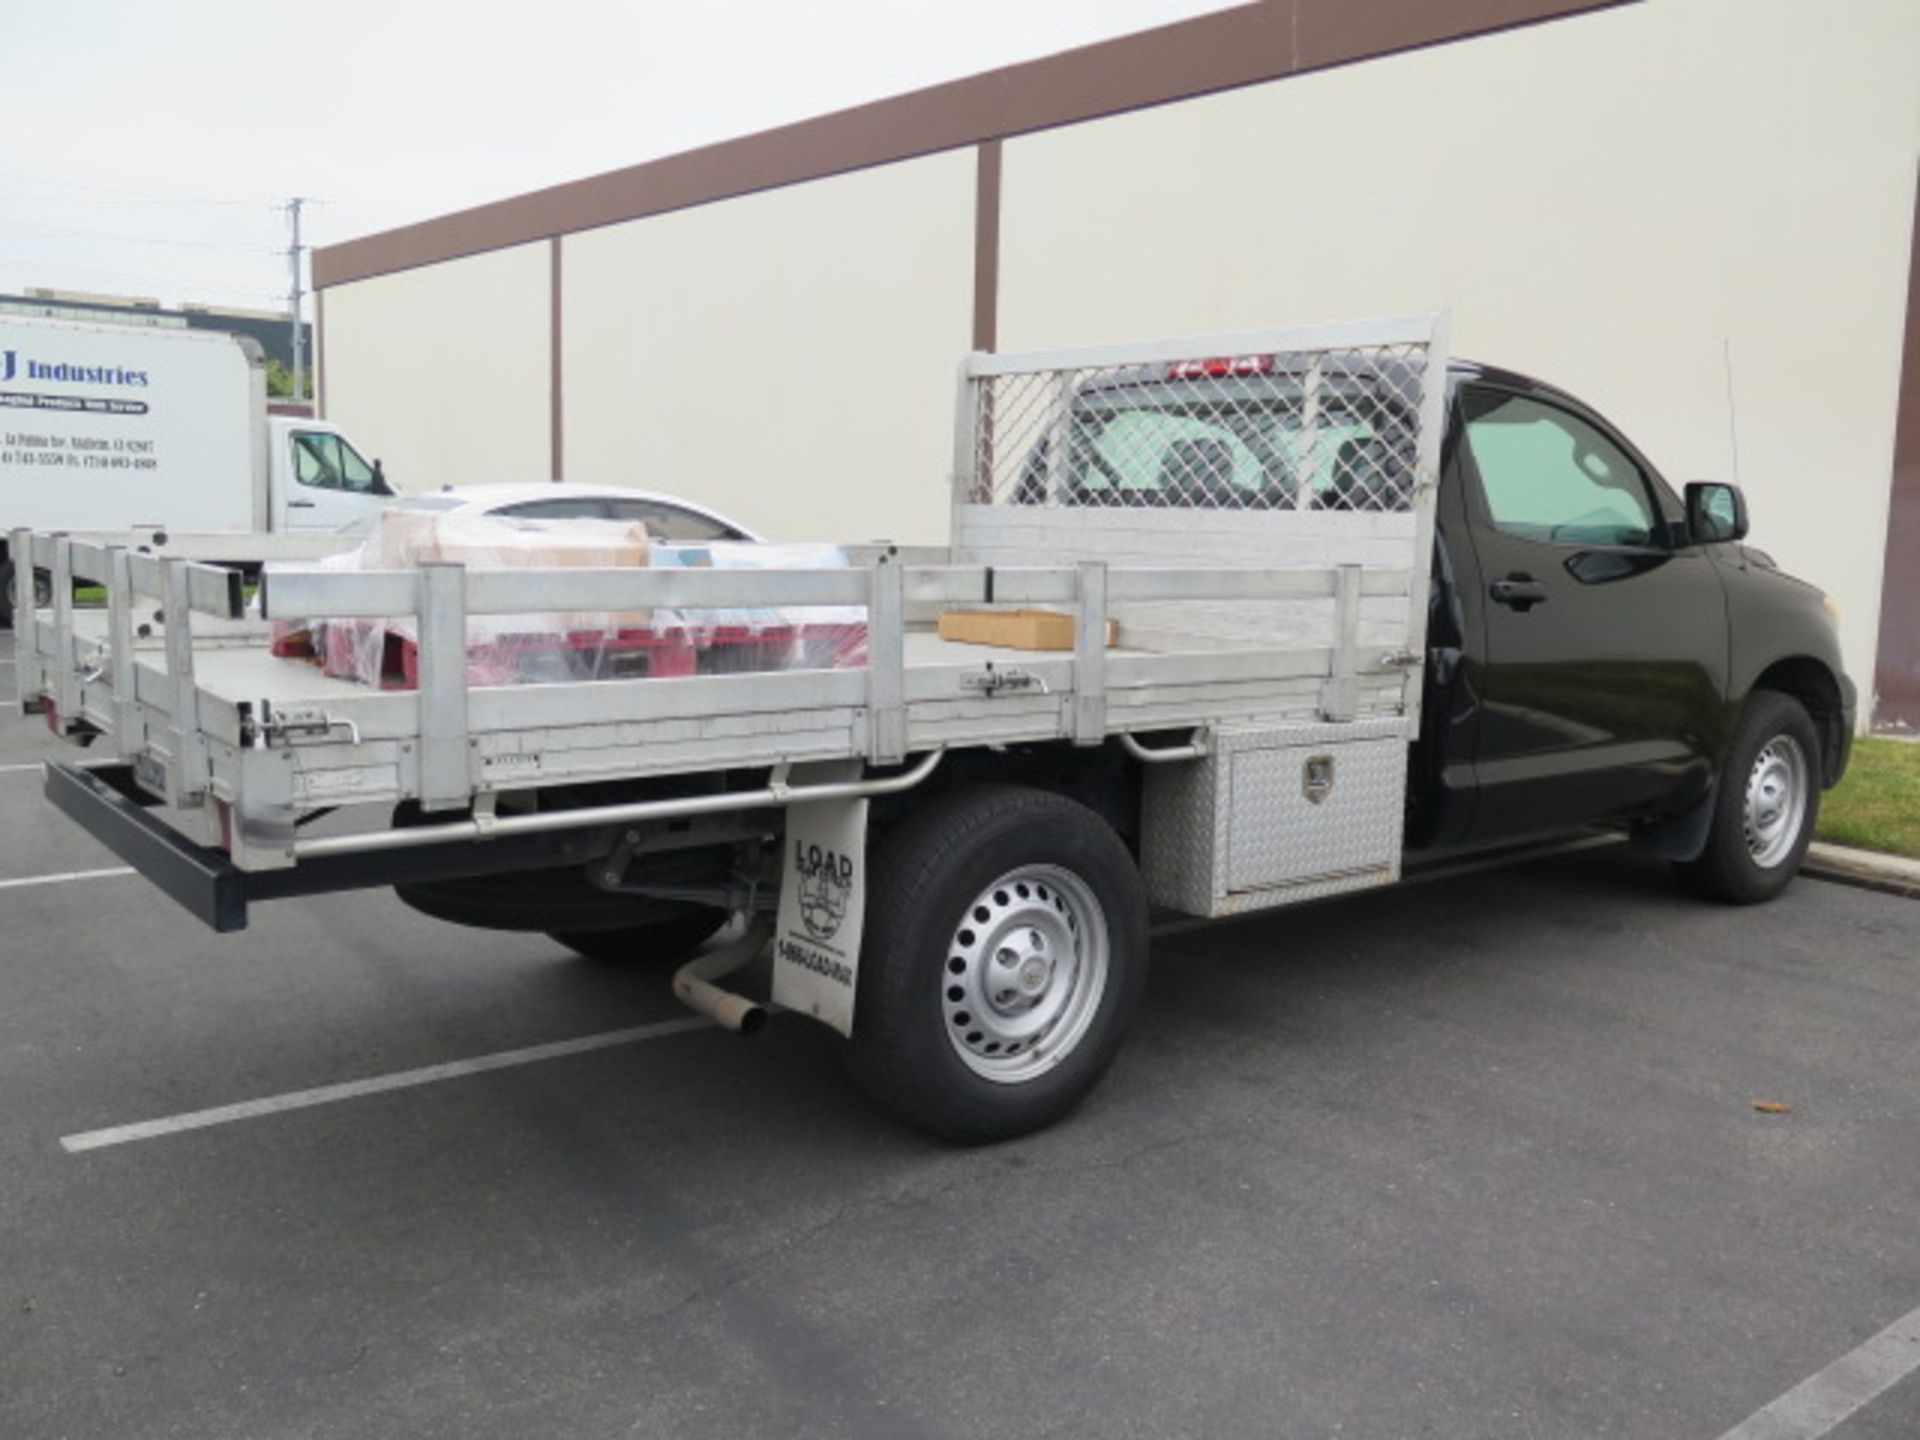 2011 Toyota Tundra 12’ Stake Bed Truck Lisc# 07819B1 w/ Gas Engine, Automatic Trans, SOLD AS IS - Image 5 of 24